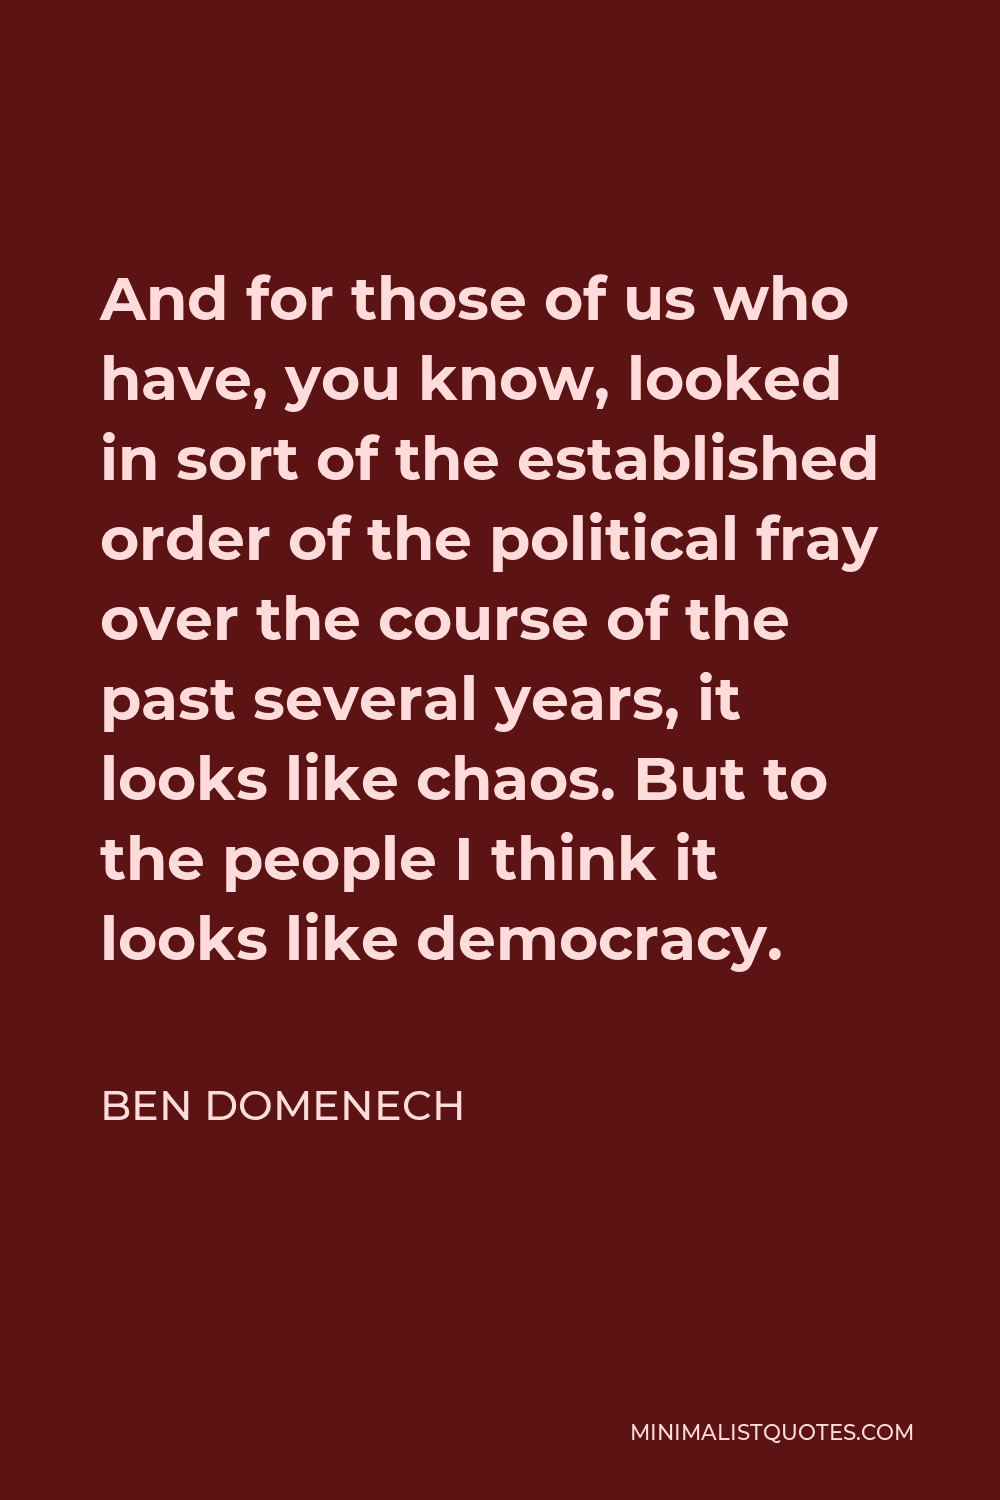 Ben Domenech Quote - And for those of us who have, you know, looked in sort of the established order of the political fray over the course of the past several years, it looks like chaos. But to the people I think it looks like democracy.